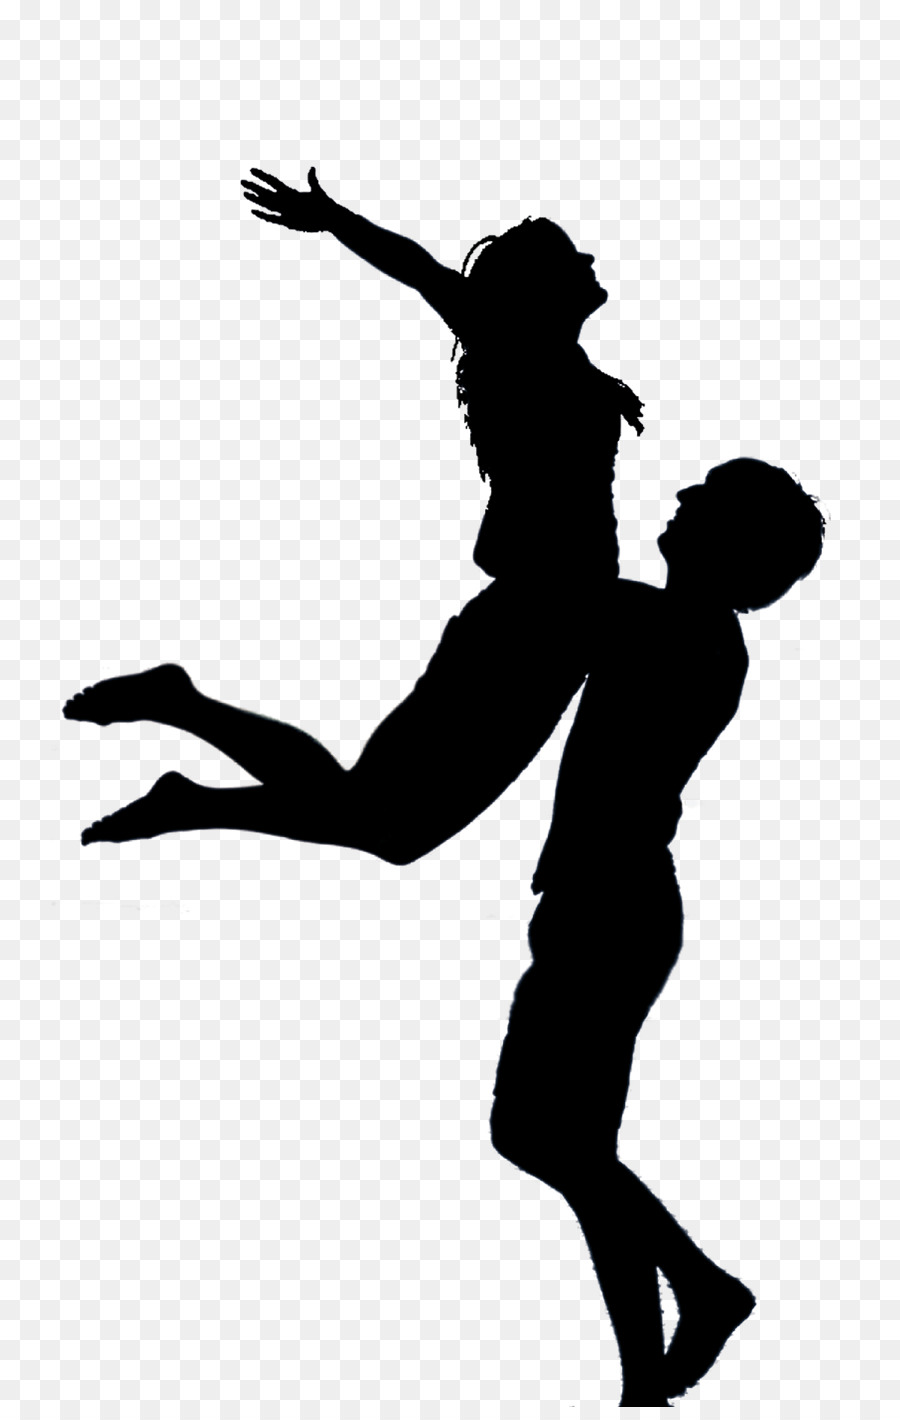 Silhouette Ballet Dancer Drawing - embracing couple png download - 834*1407 - Free Transparent Silhouette png Download.